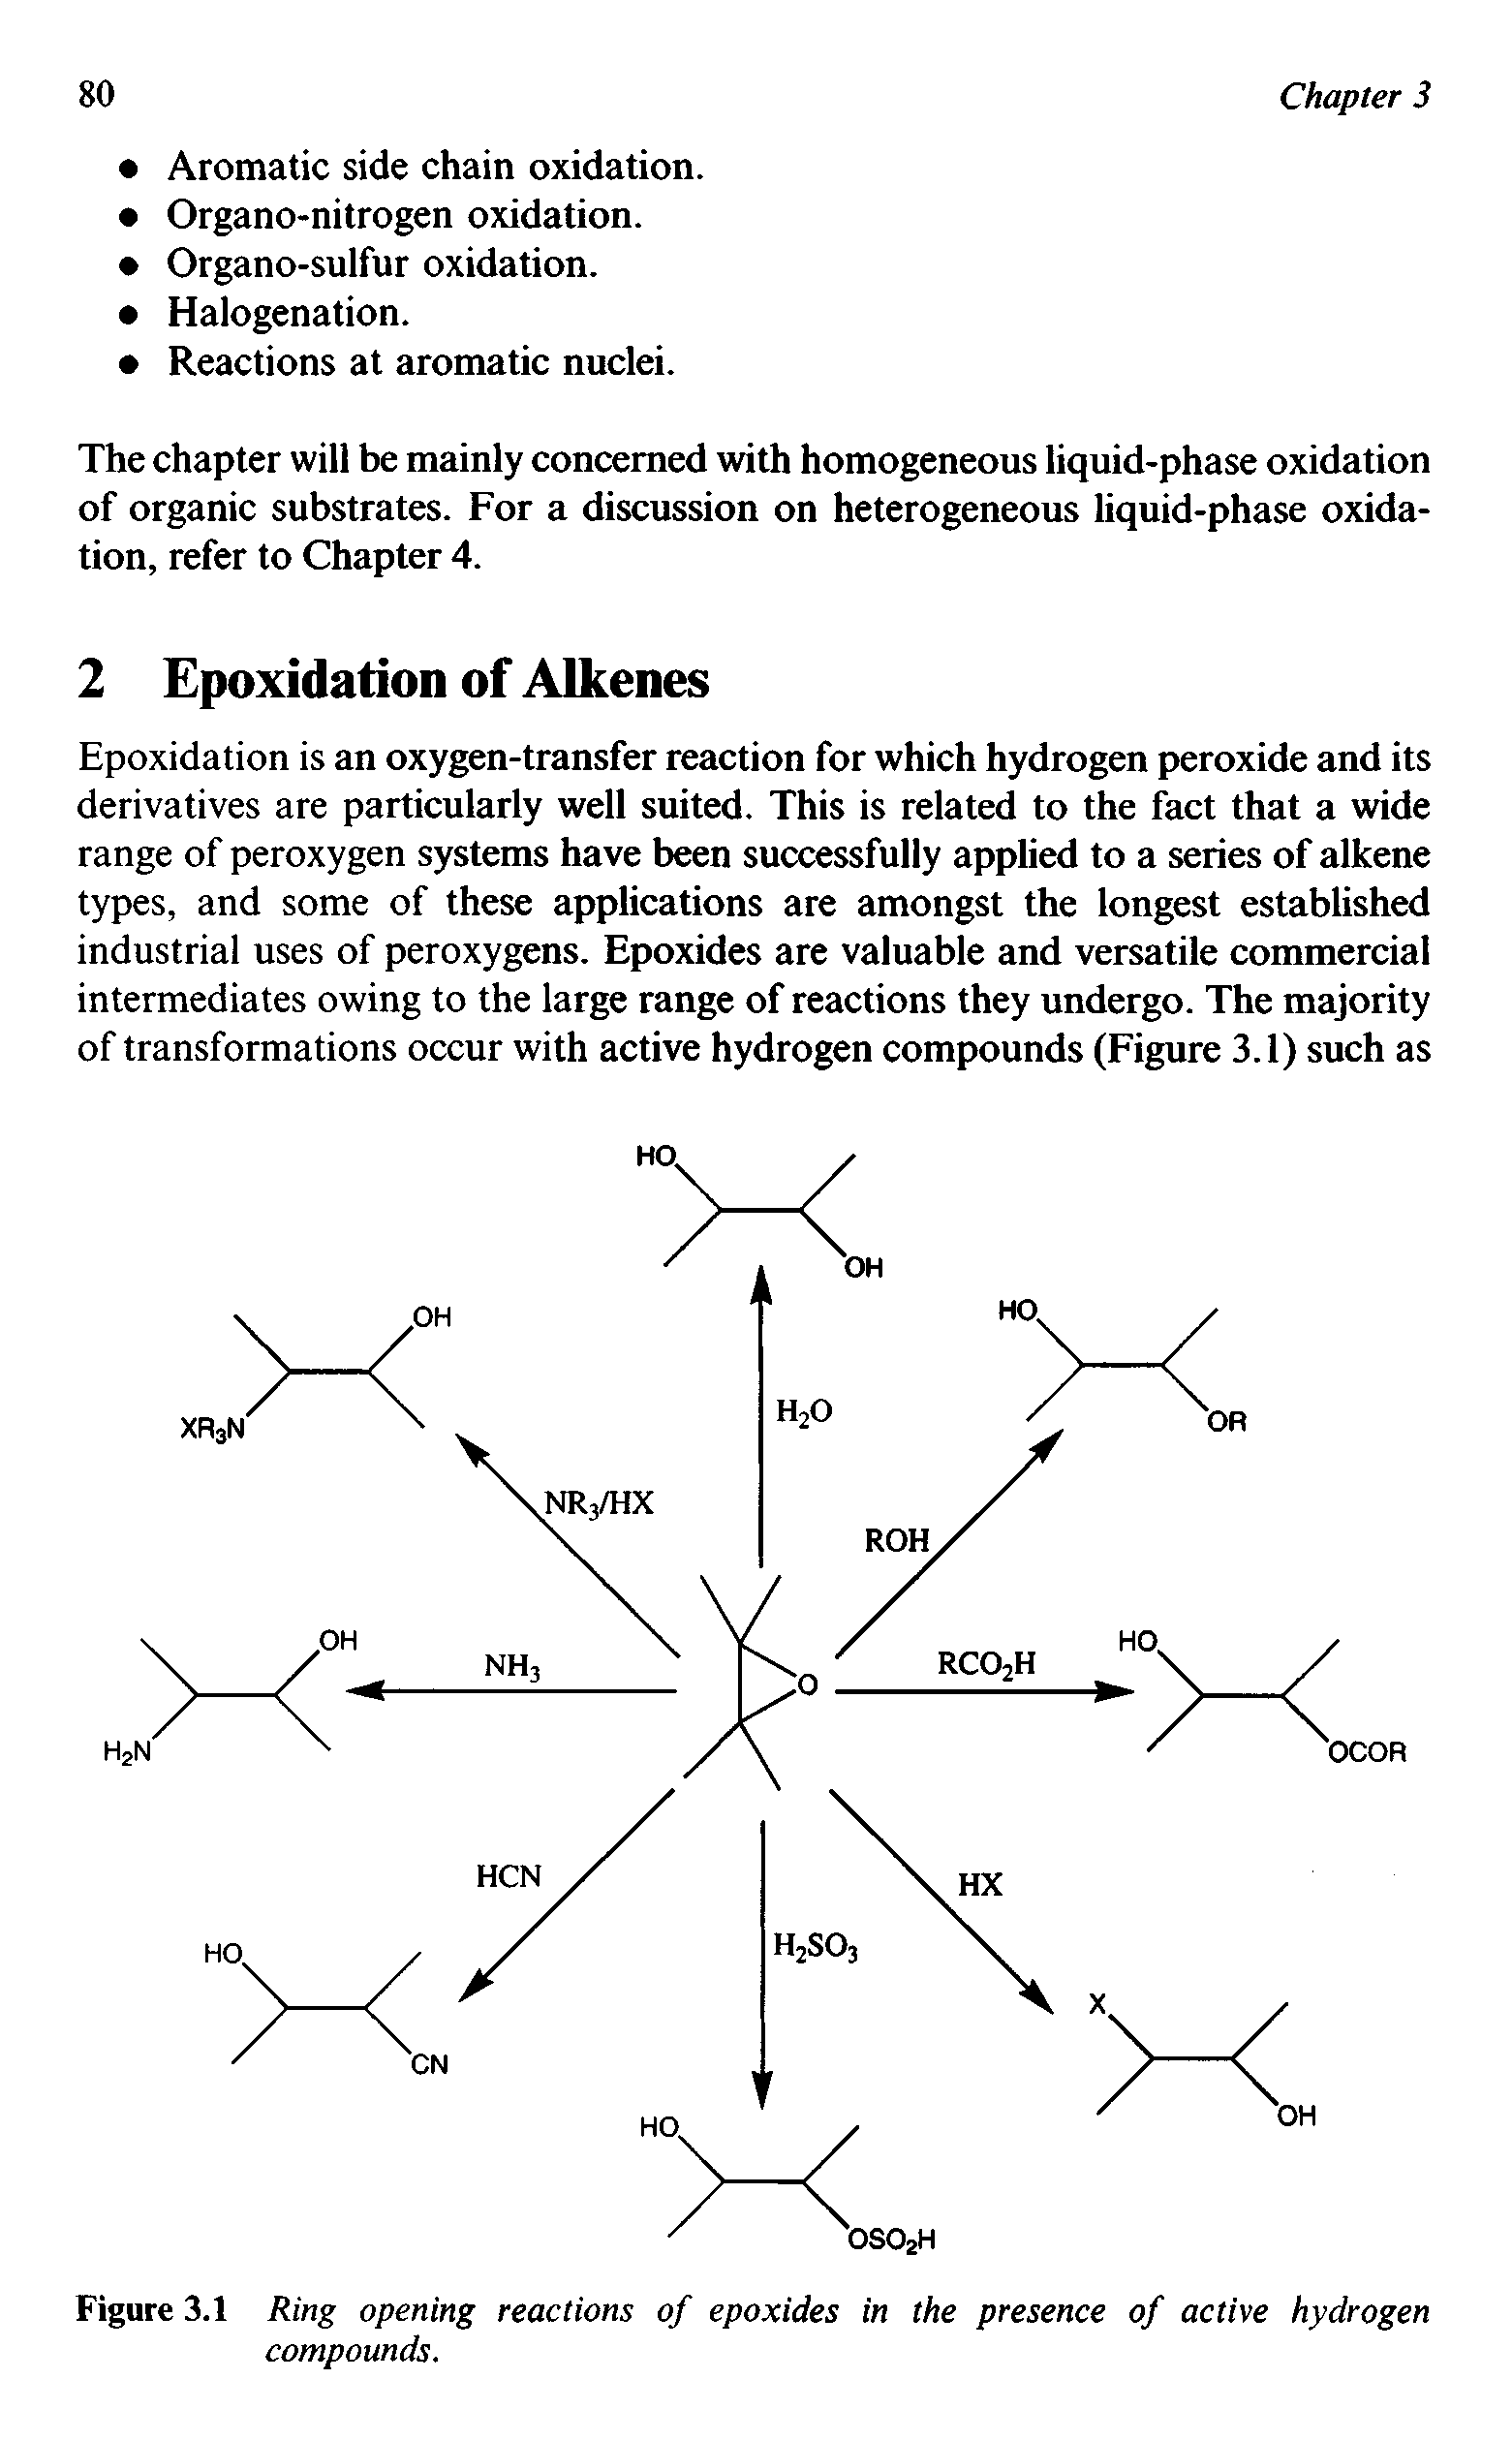 Figure 3.1 Ring opening reactions of epoxides in the presence of active hydrogen compounds.